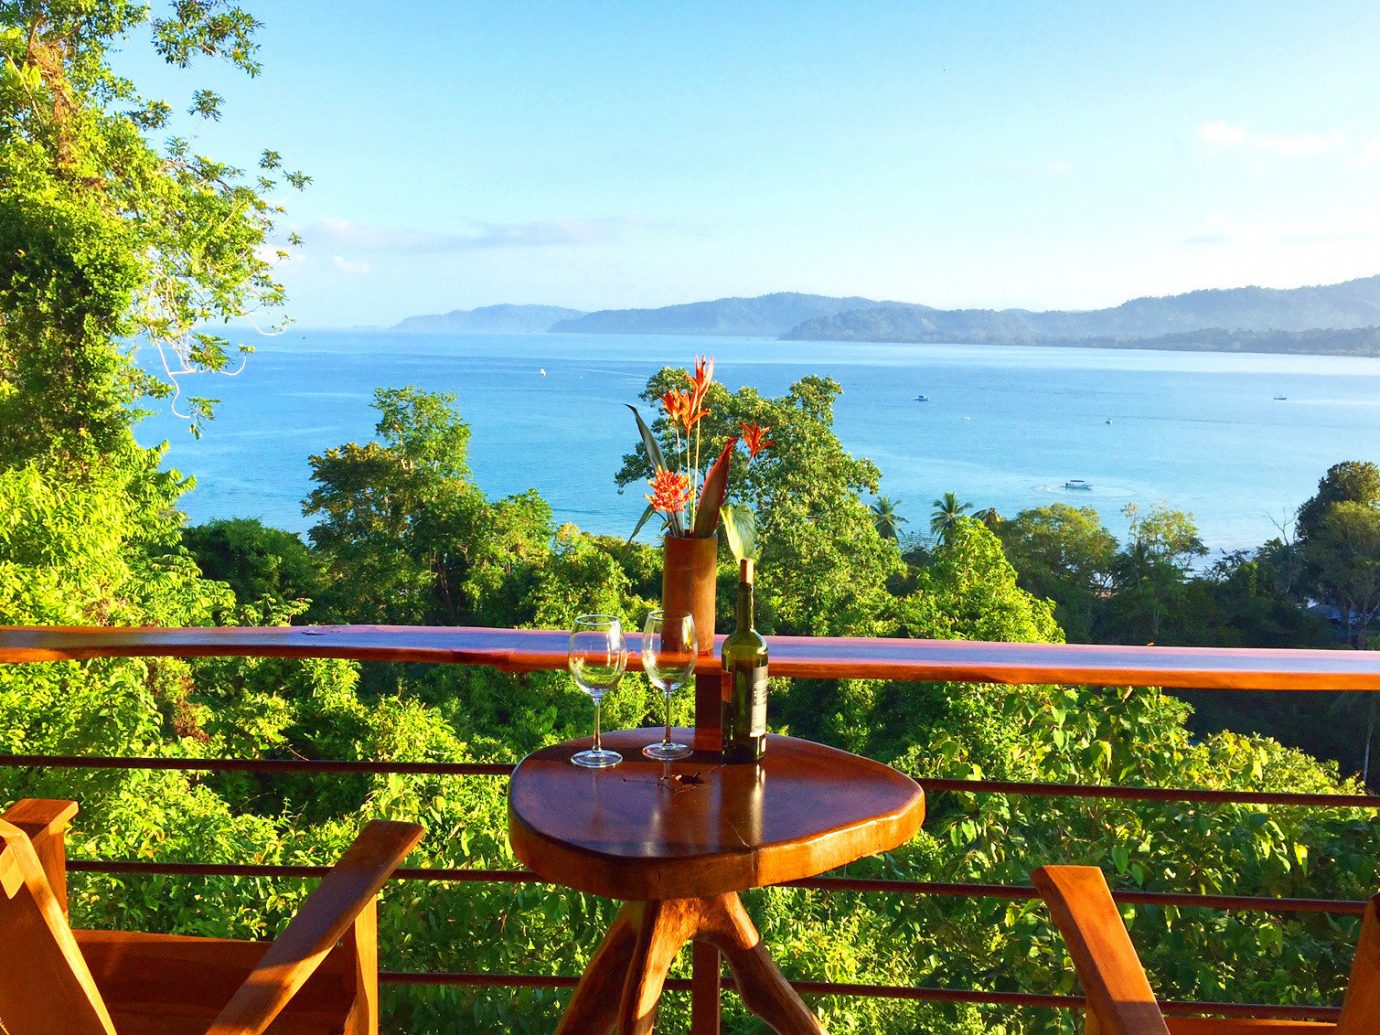 View from Drake Bay Getaway Resort on the Osa Peninsula in Costa Rica